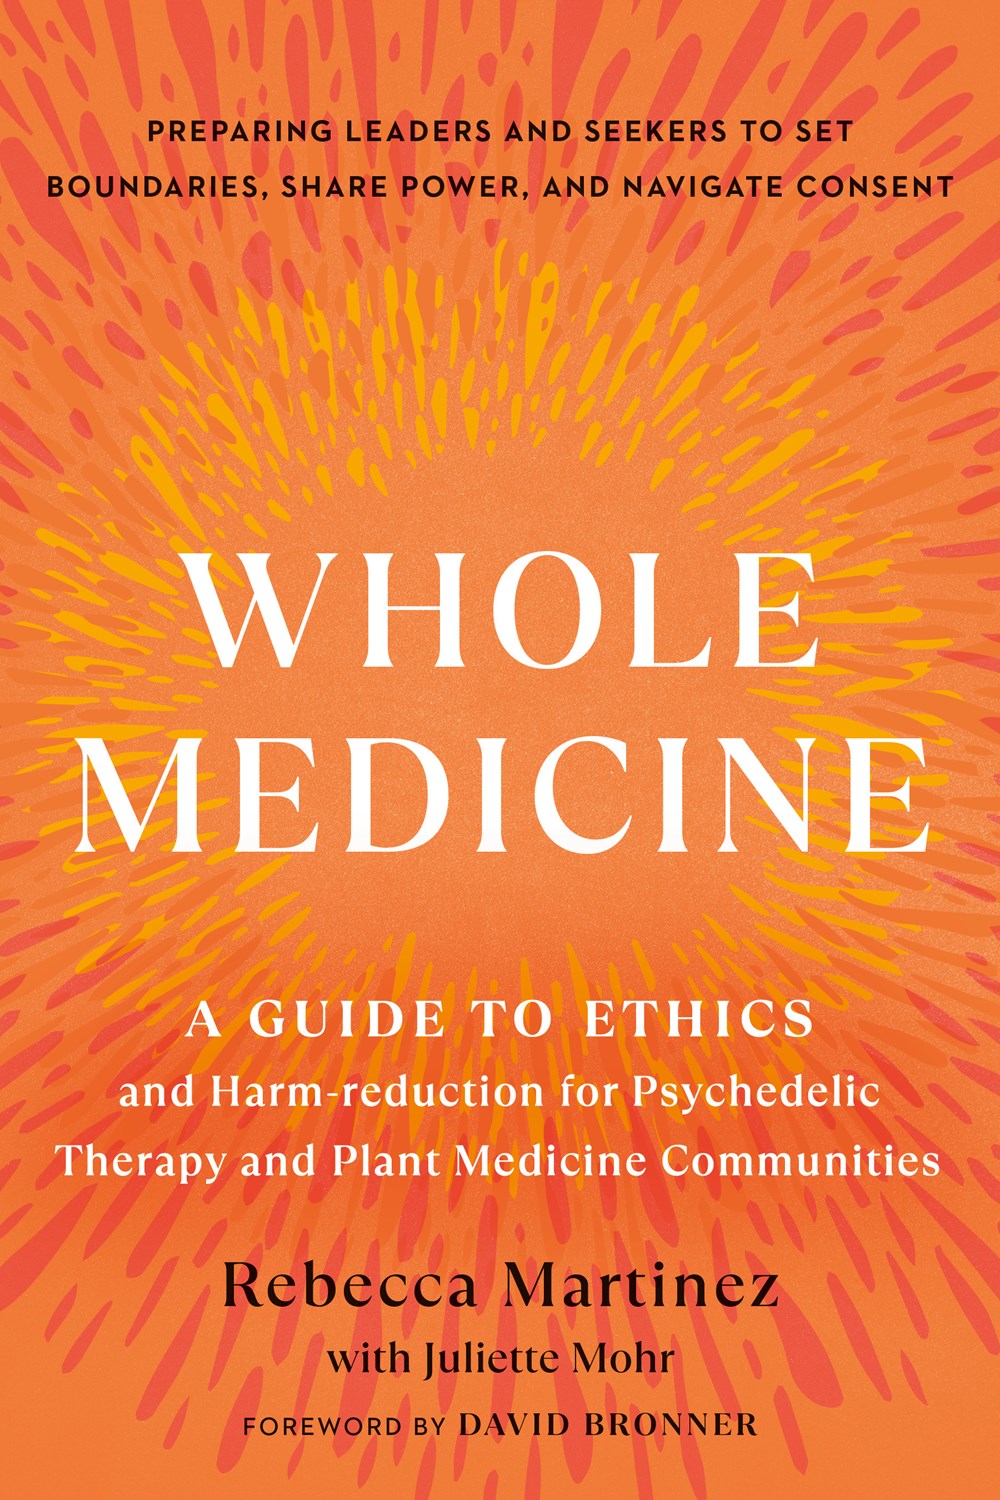 Whole Medicine : A Guide to Ethics and Harm-Reduction for Psychedelic Therapy and Plant Medicine Communities